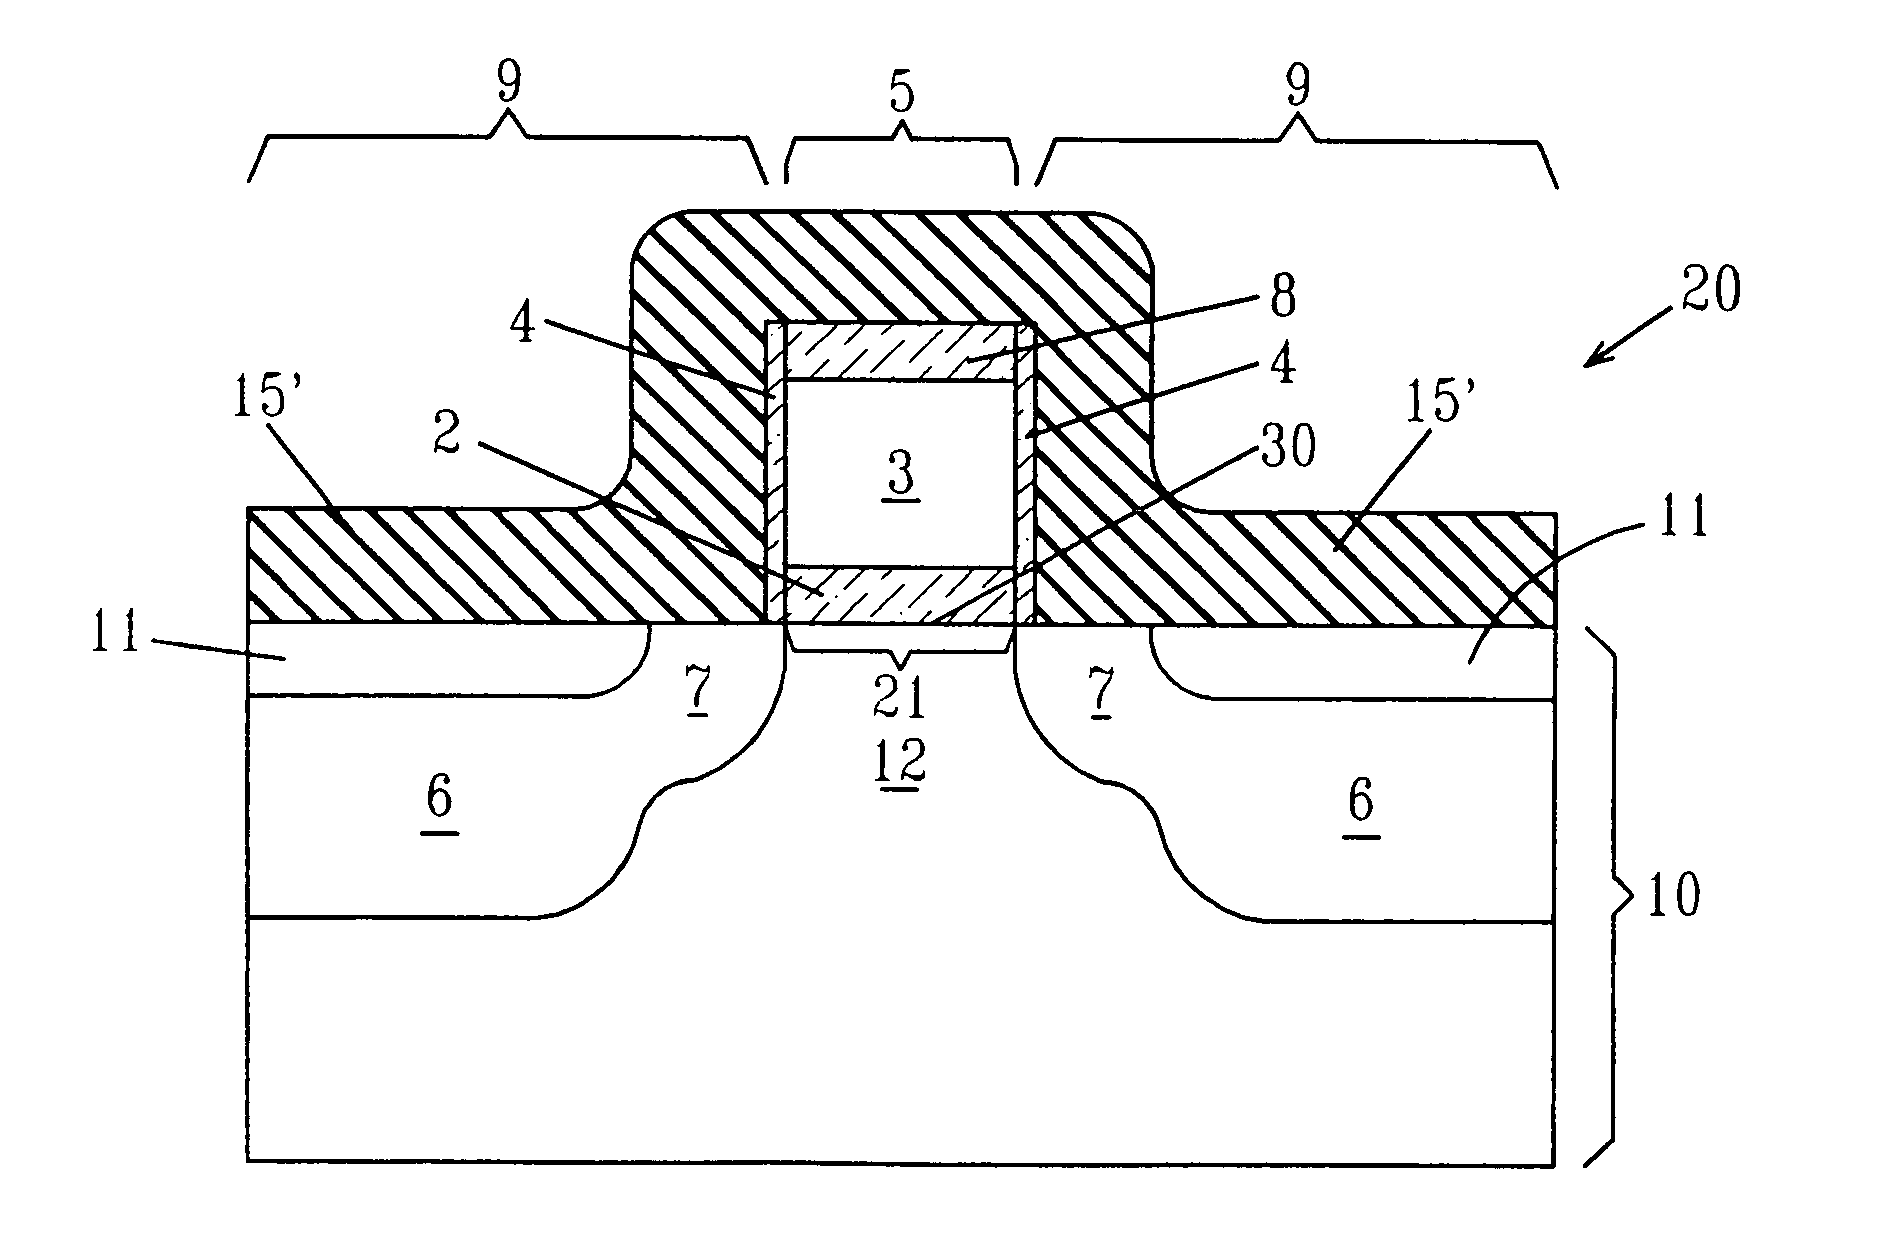 MOSFET structure with high mechanical stress in the channel